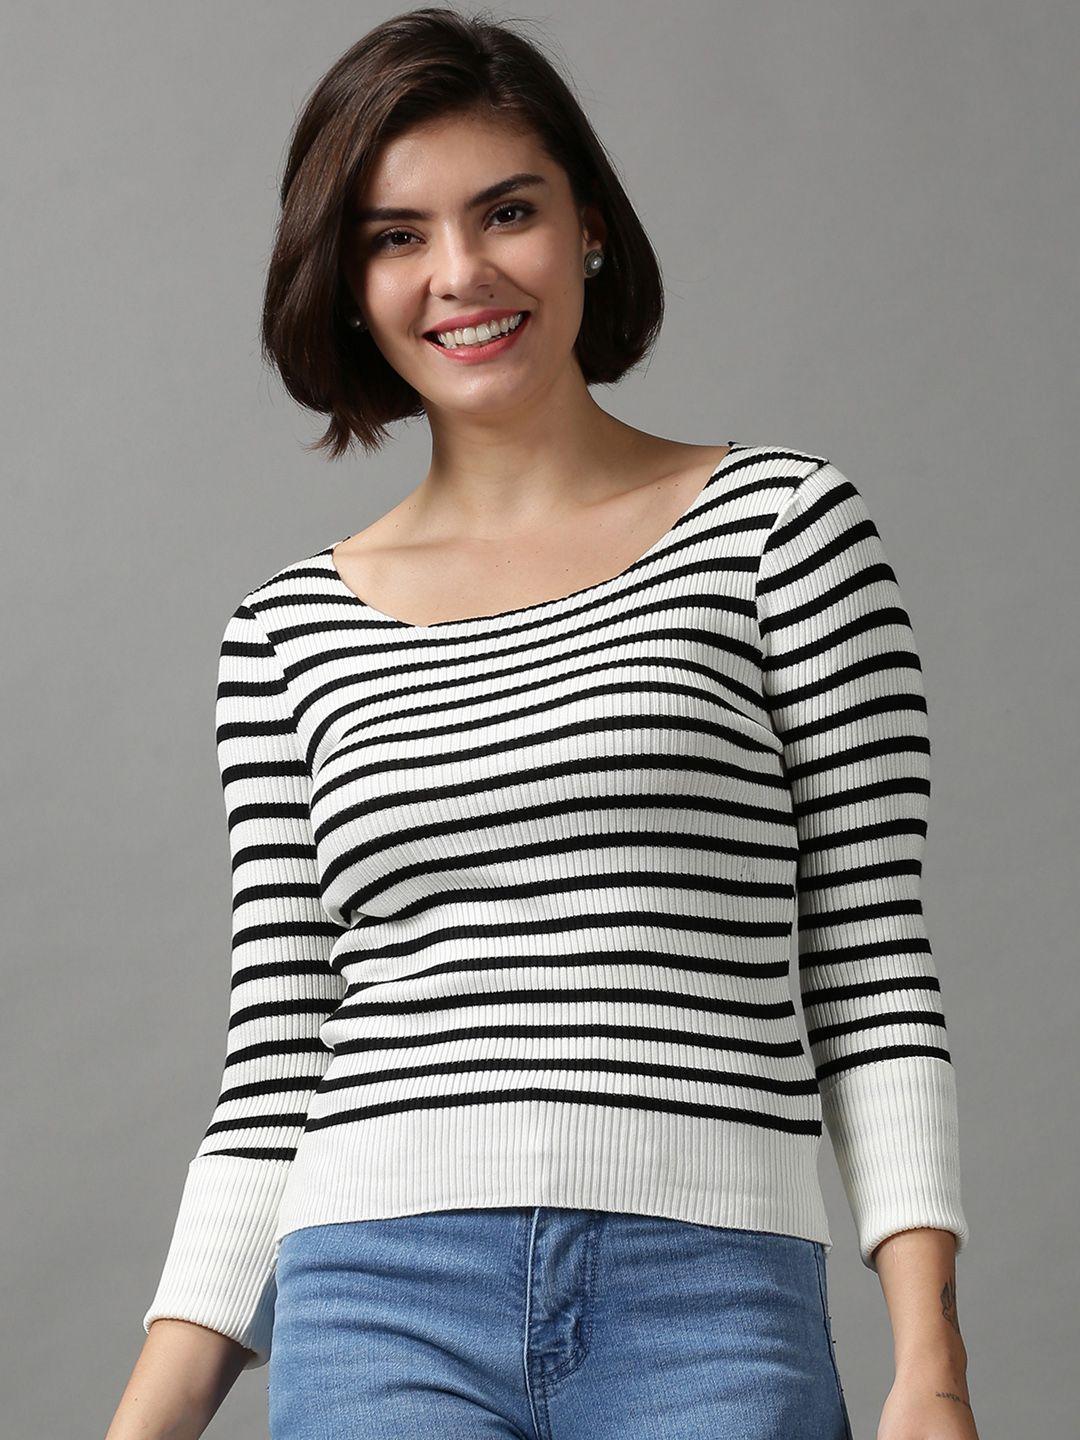 showoff white striped top